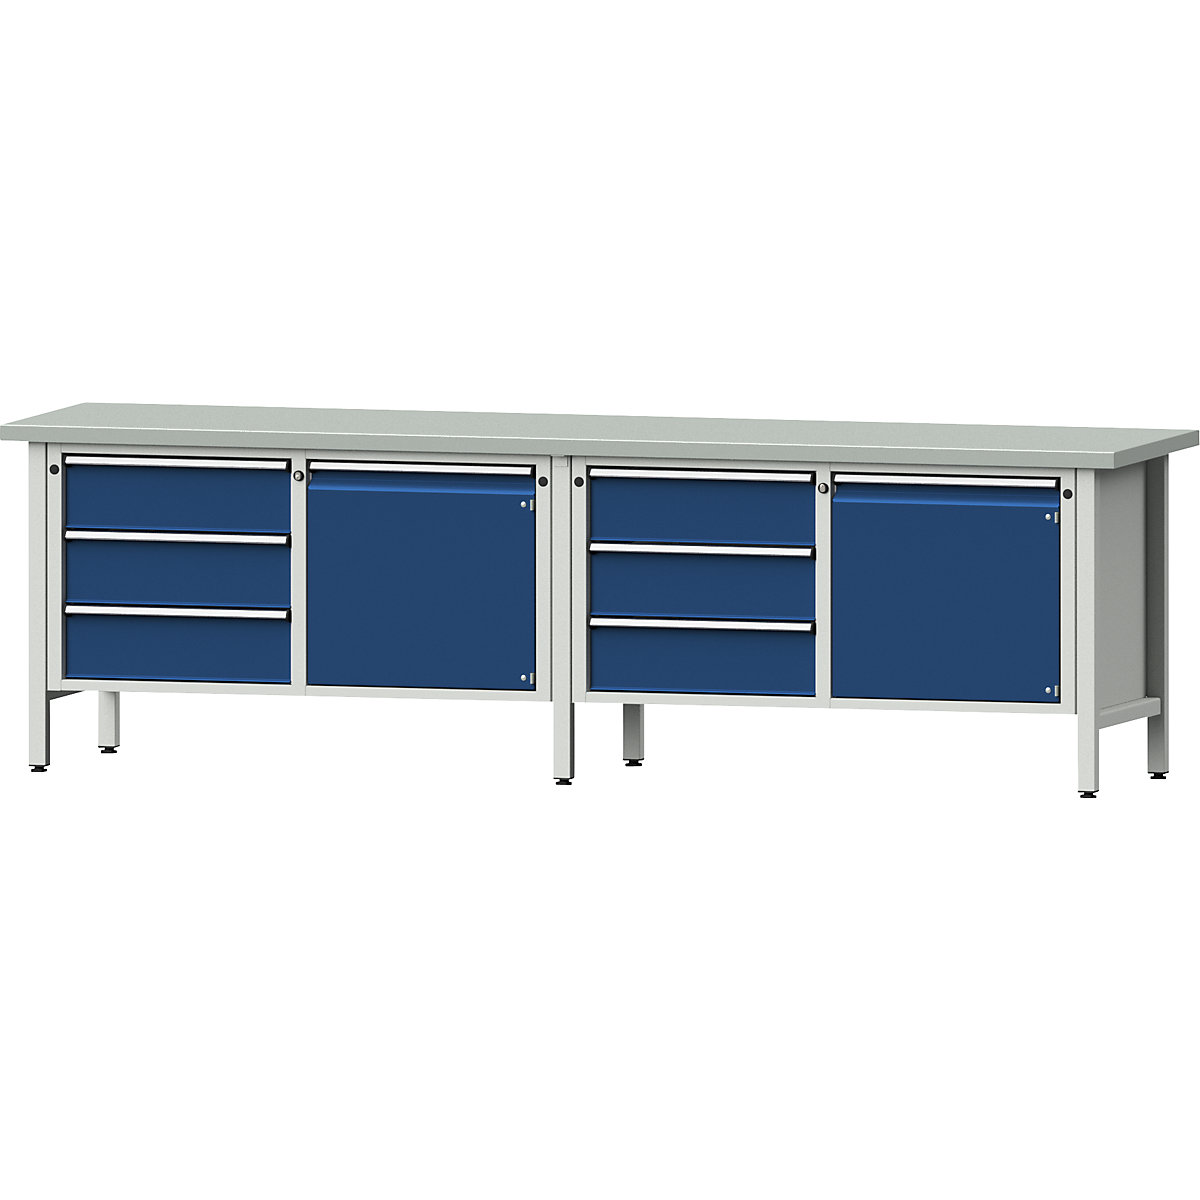 Workbench width 2800 mm, frame construction – ANKE, 2 doors, 6 drawers with full extension, sheet steel covered worktop-9